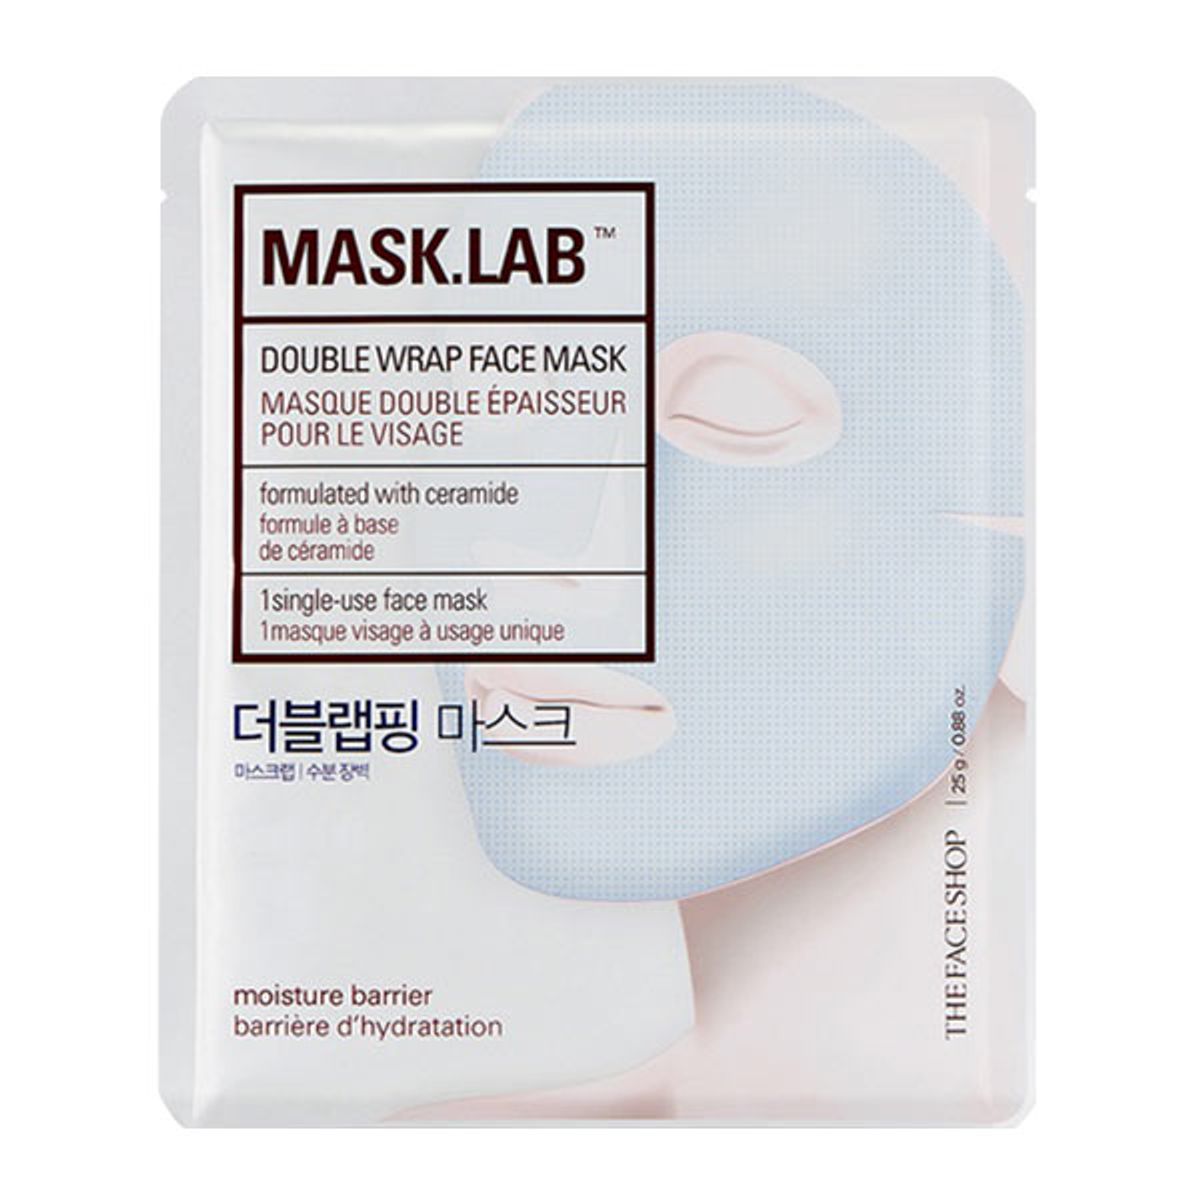 mat-na-giay-mask-lab-double-wrap-face-mask-1